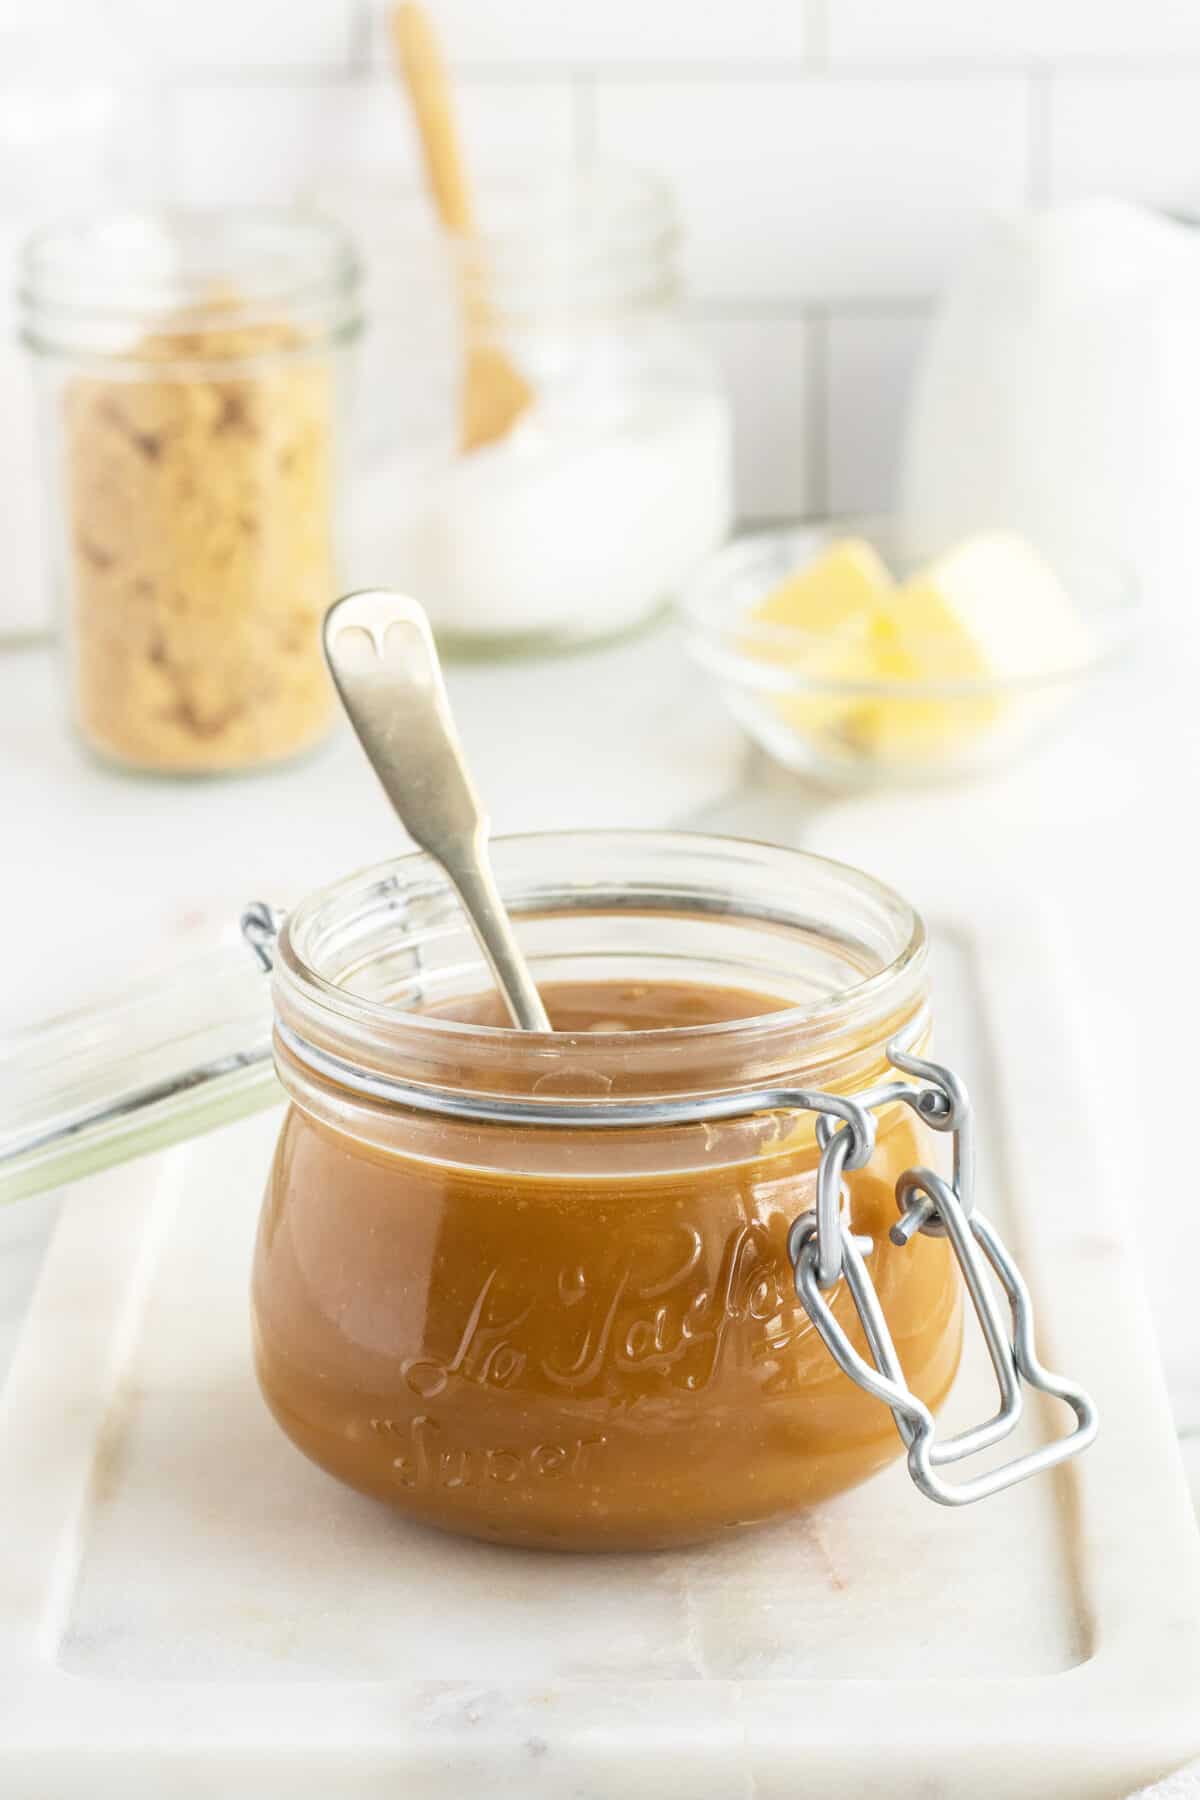 Salted Caramel Sauce in a jar with a spoon inside